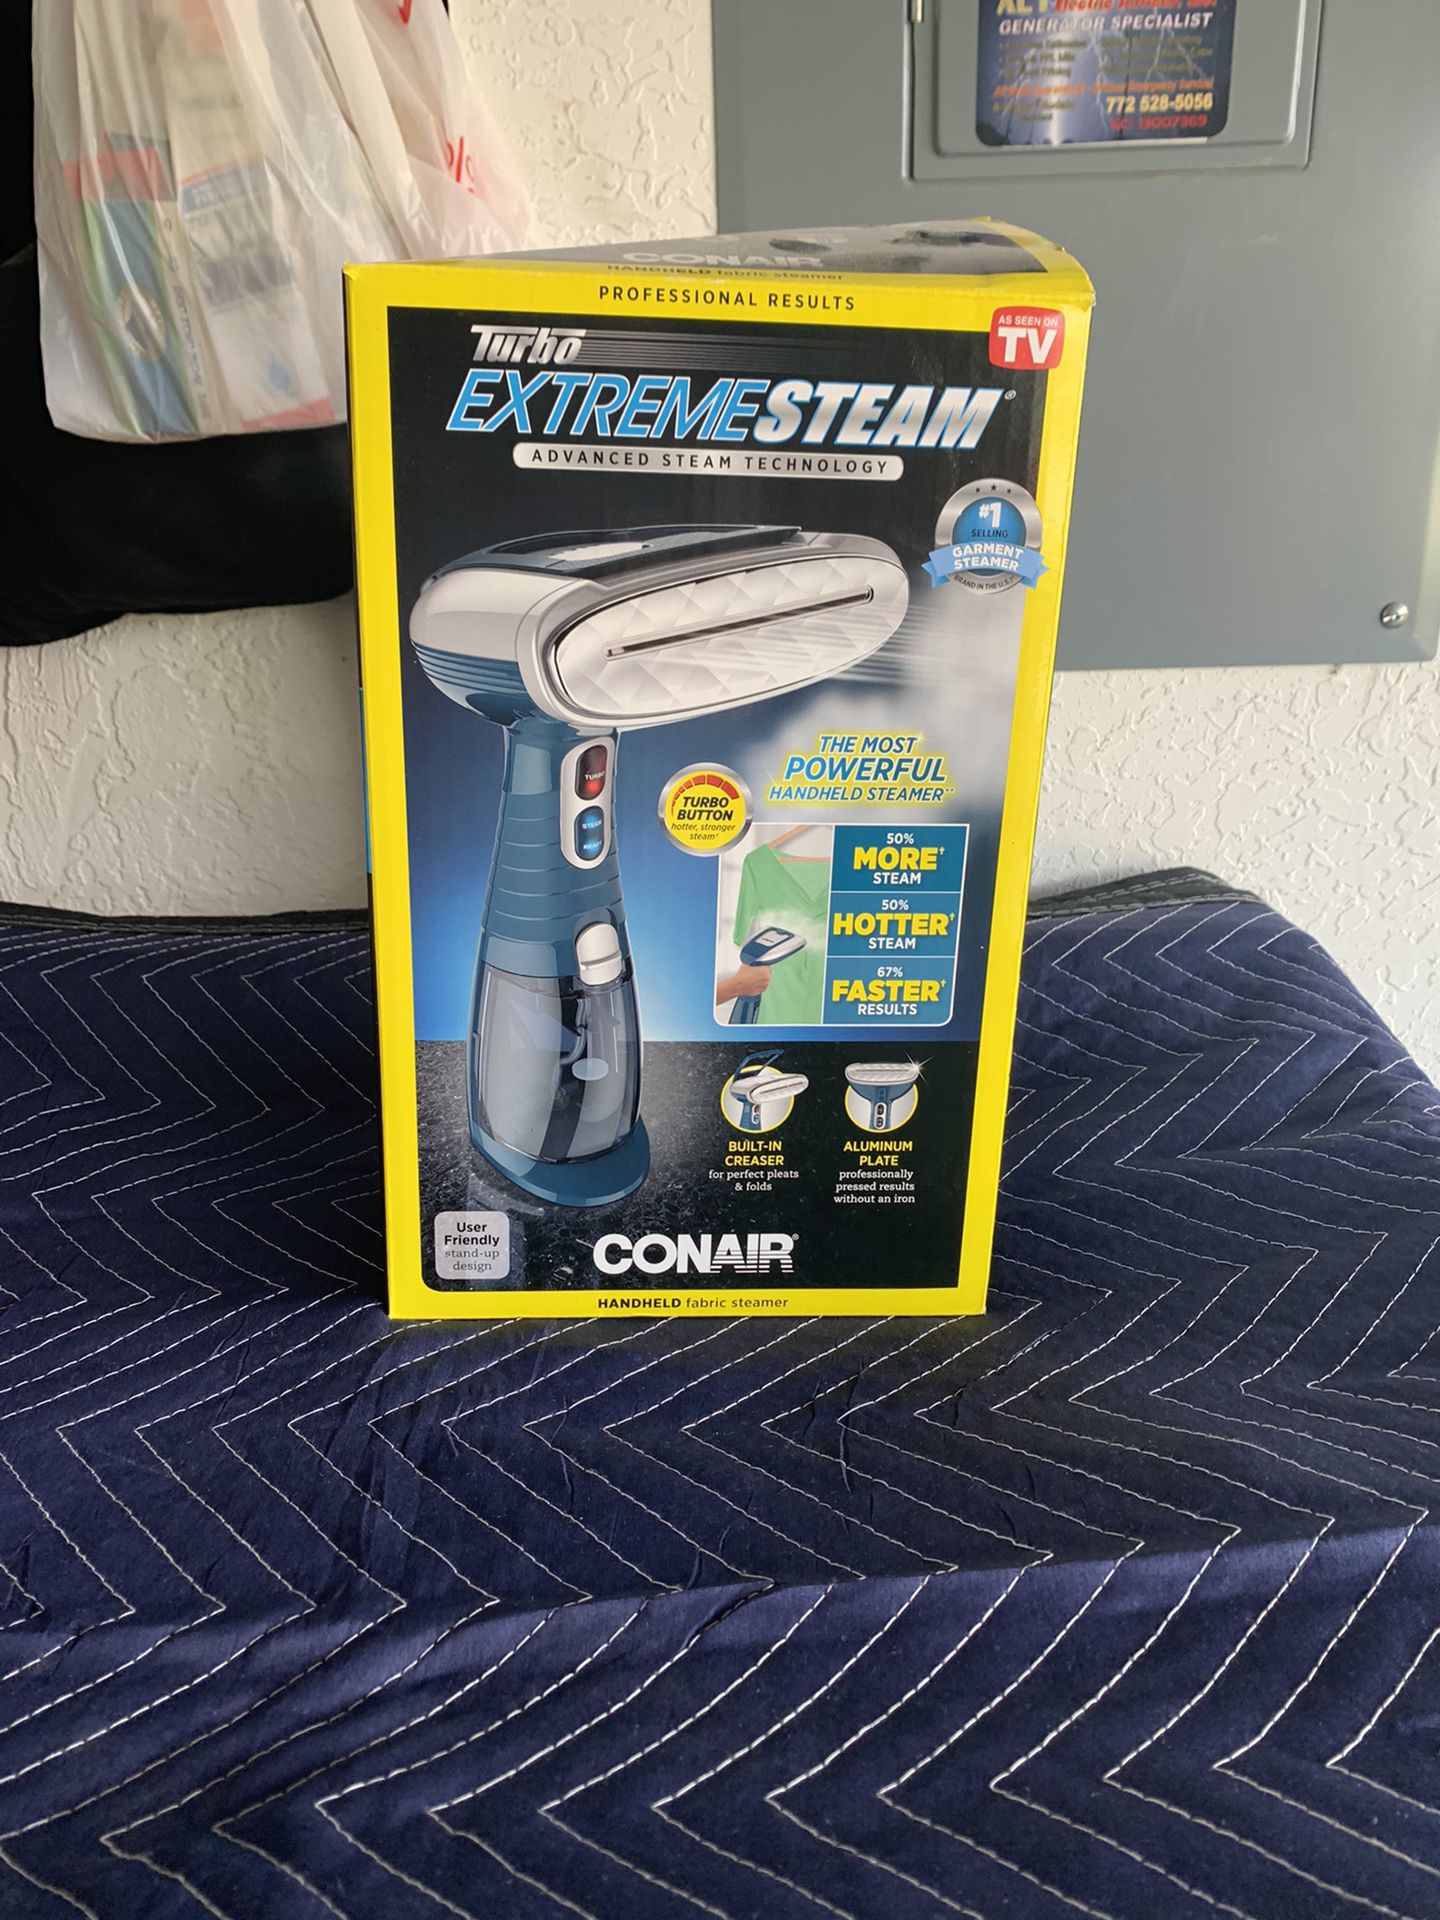 MAKE OFFER—Conair Extreme Steam Turbo Handheld Fabric Steamer GS38